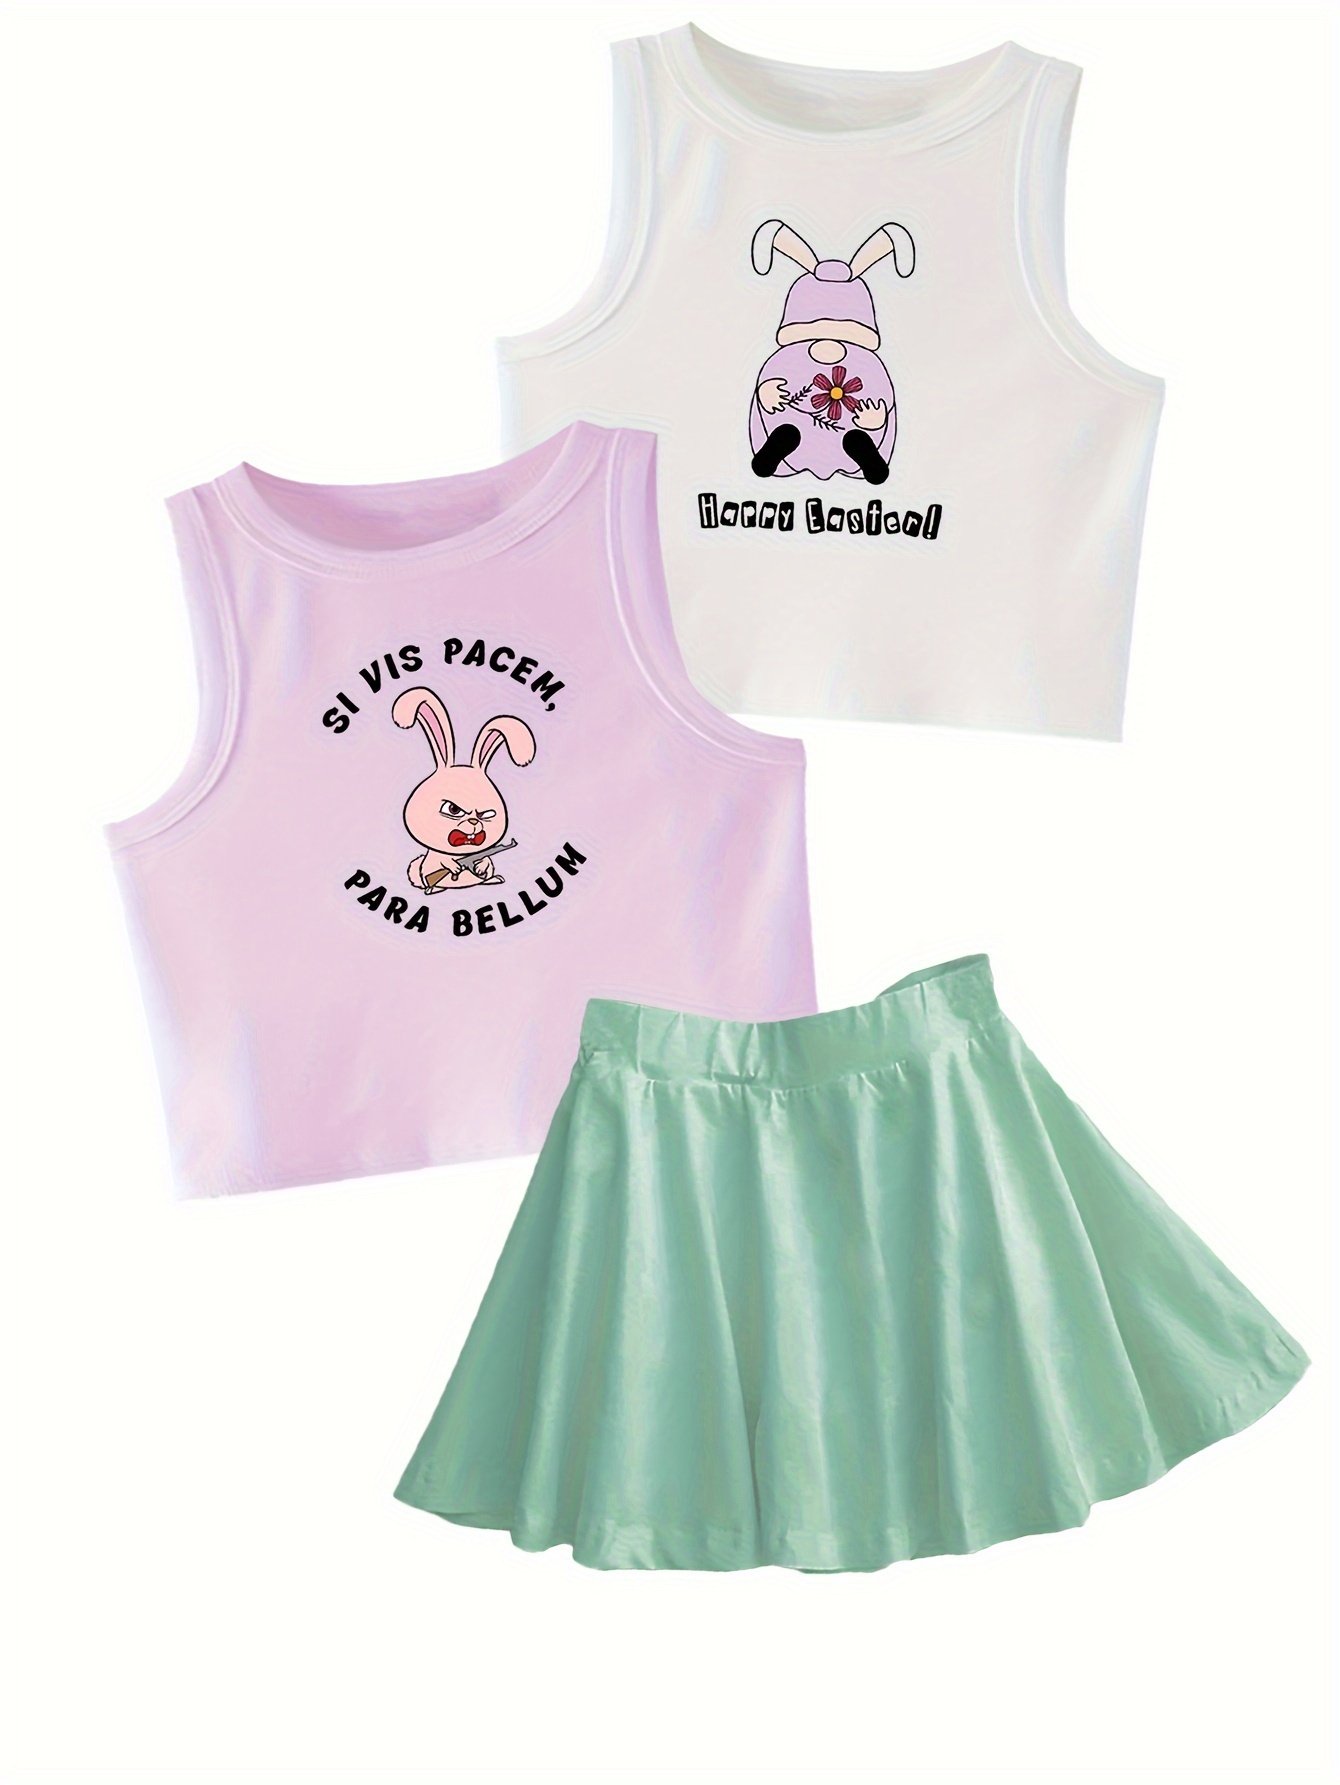 NEW Boutique Easter Bunny Rabbit Tunic Dress & Leggings Girls Outfit Set 